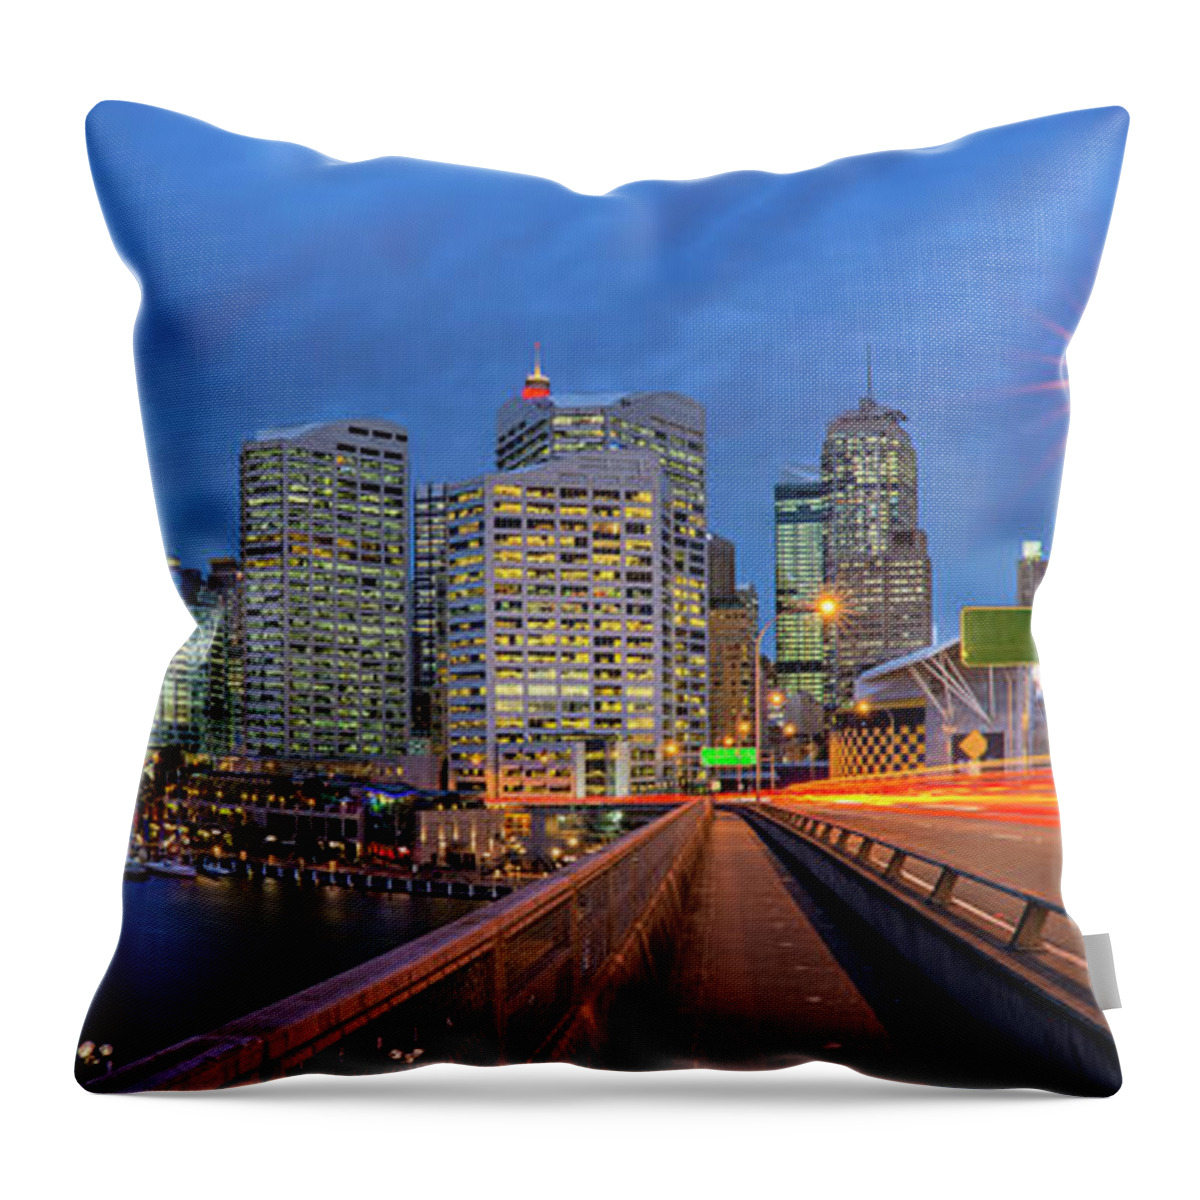 Panoramic Throw Pillow featuring the photograph Sydney City At Dusk by Atomiczen